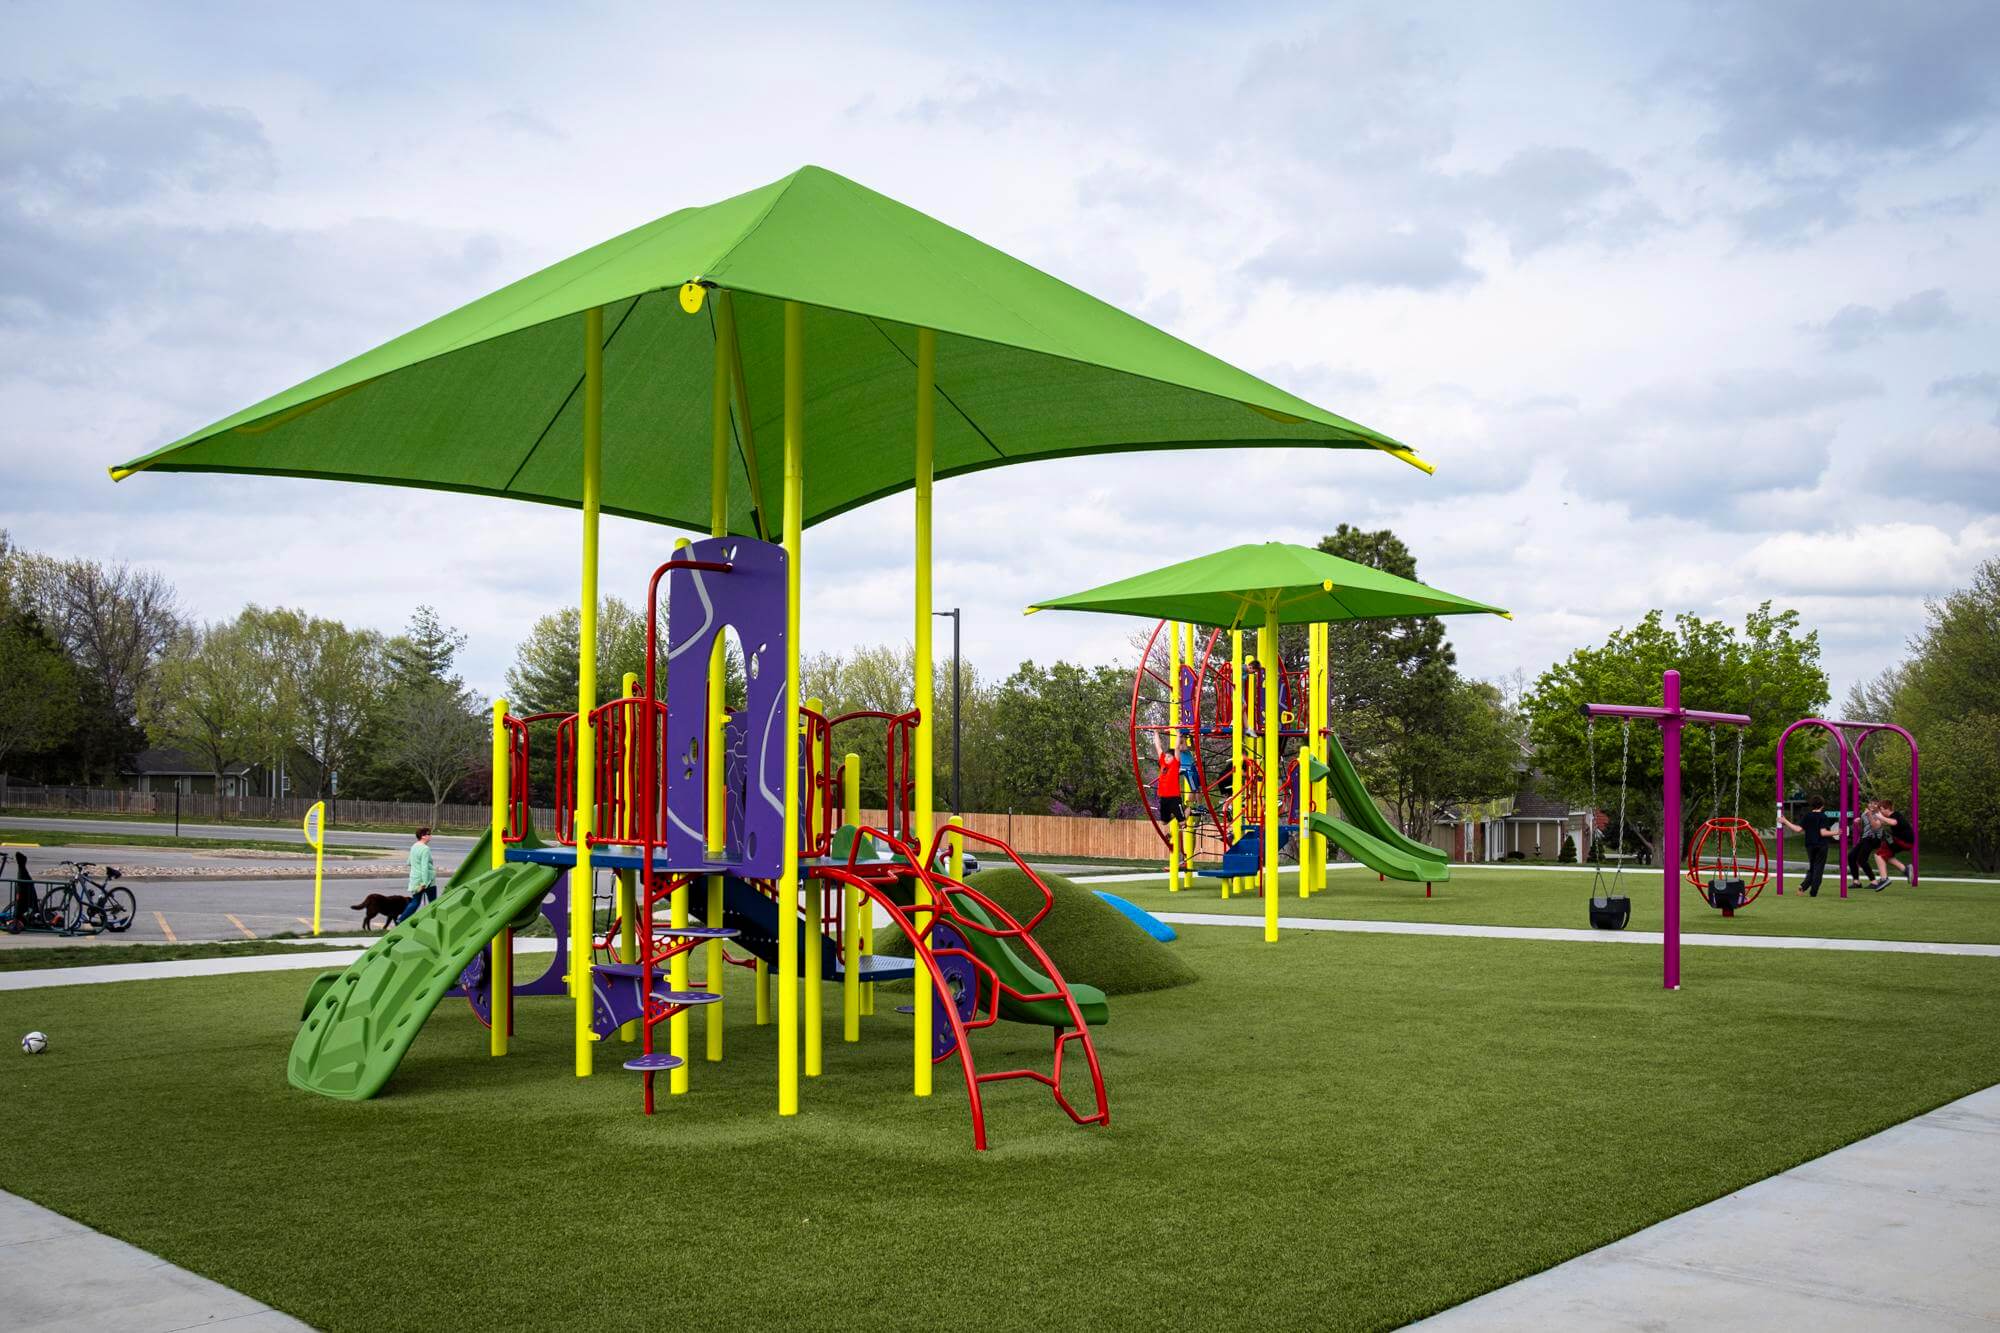 Playground with artificial turf and a variety of climbing structures.